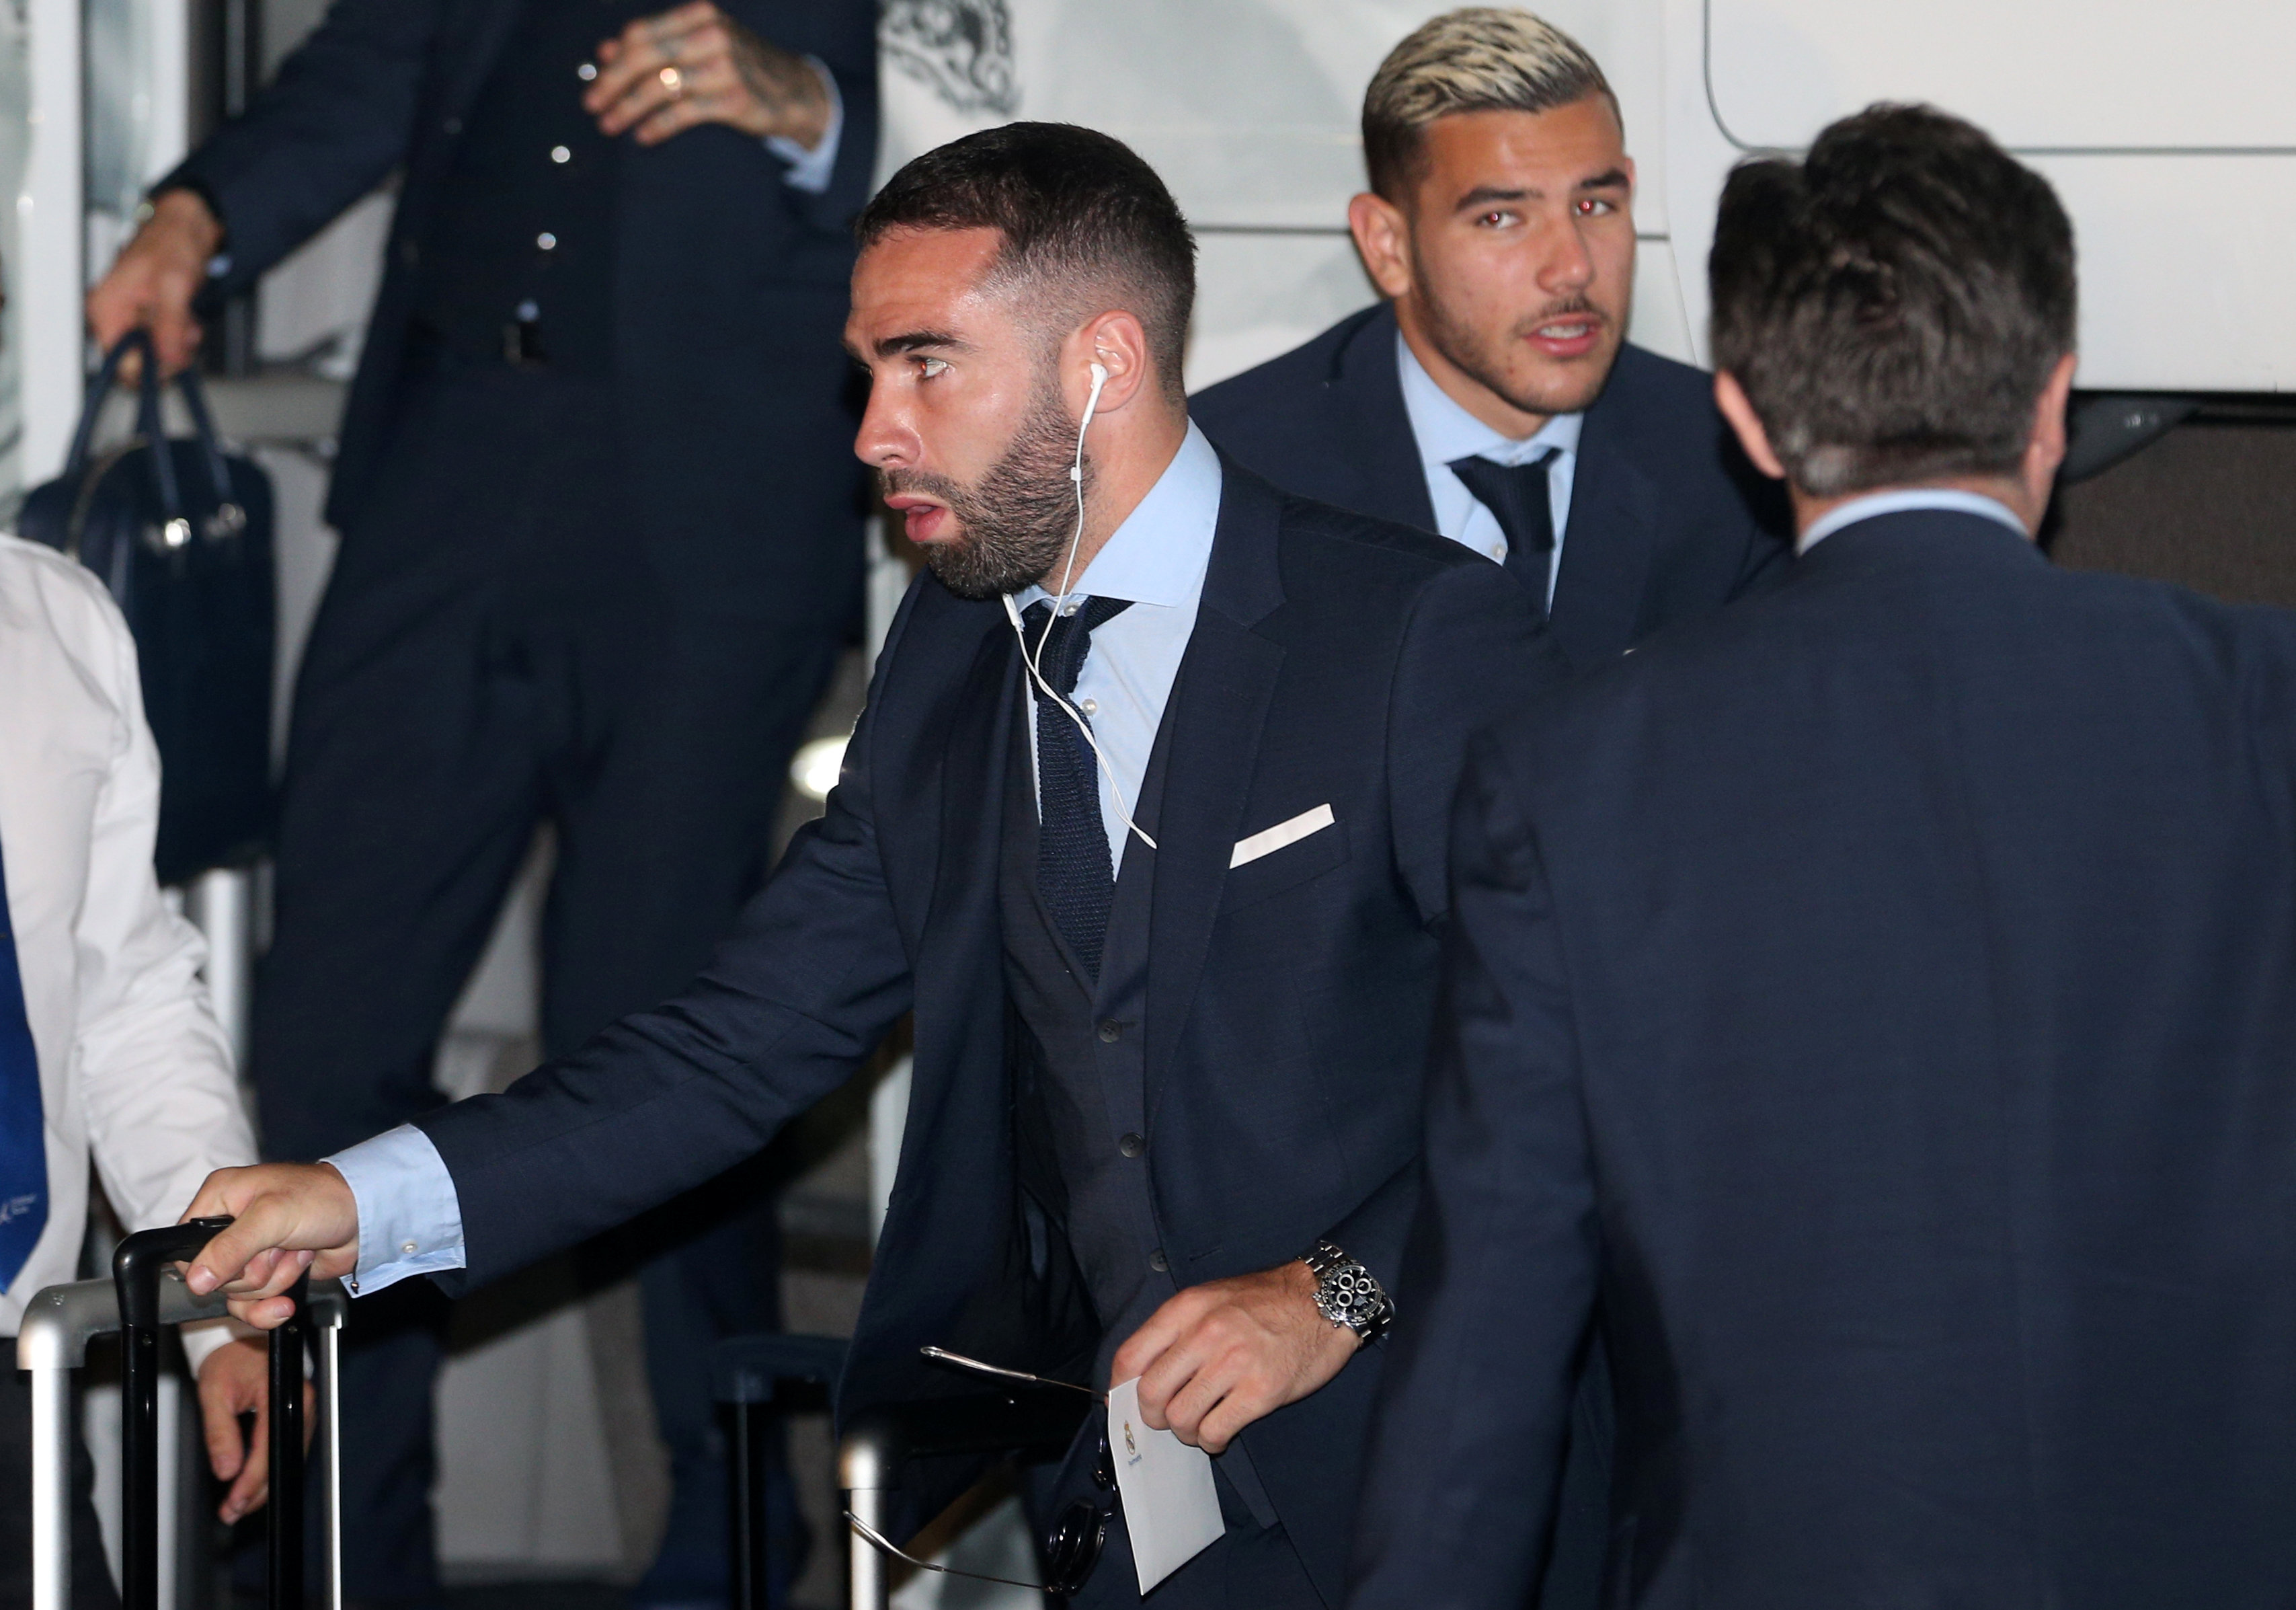 Football: Spain's Carvajal expected to be fit for World Cup